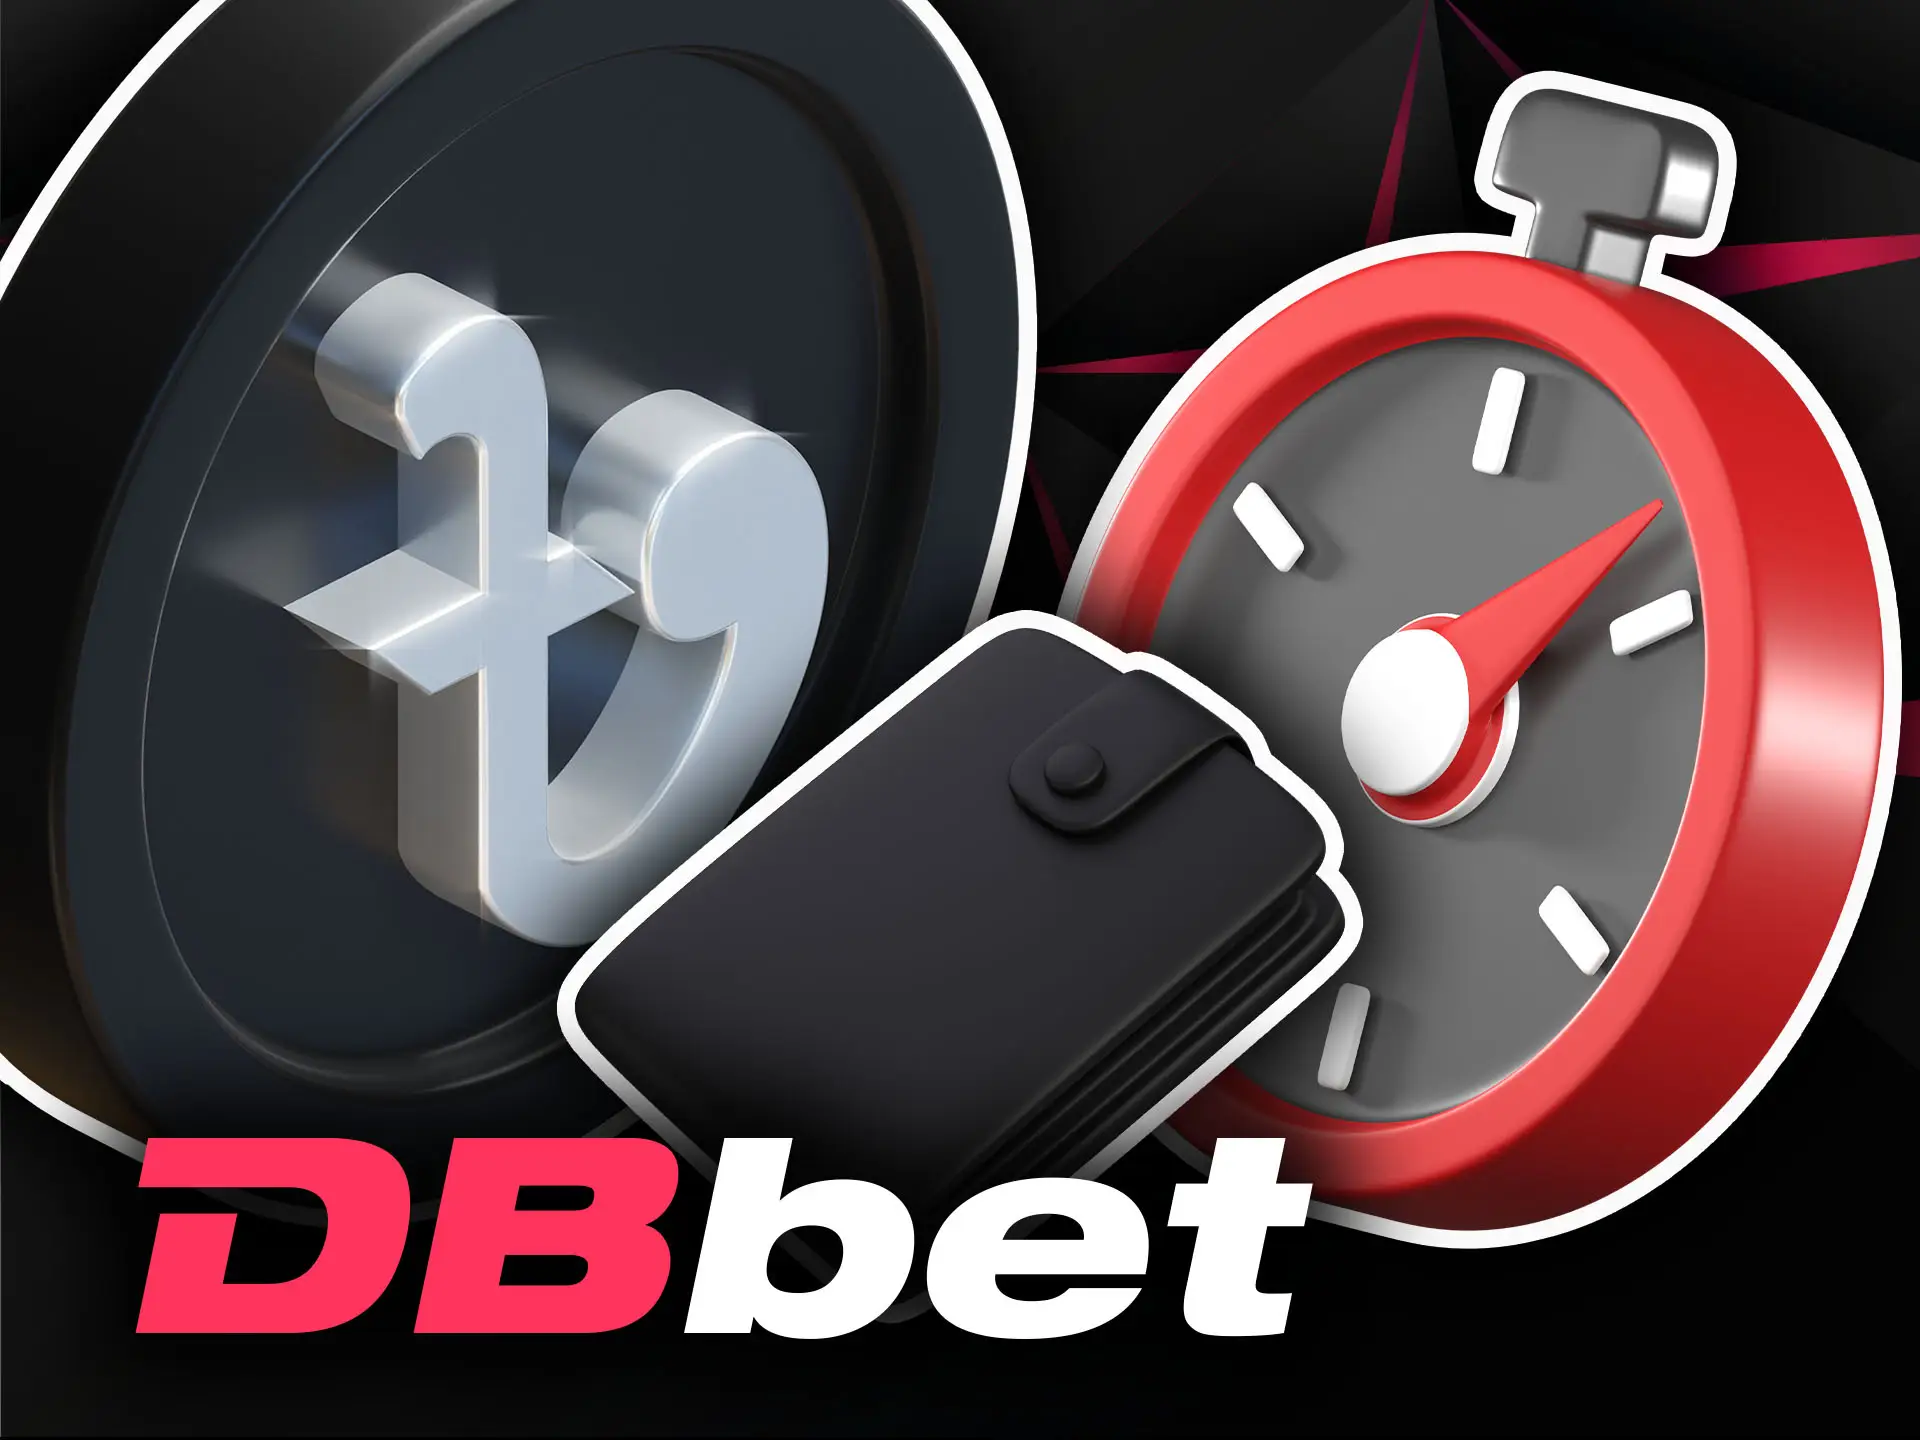 All the payments on DBbet are fast and smooth